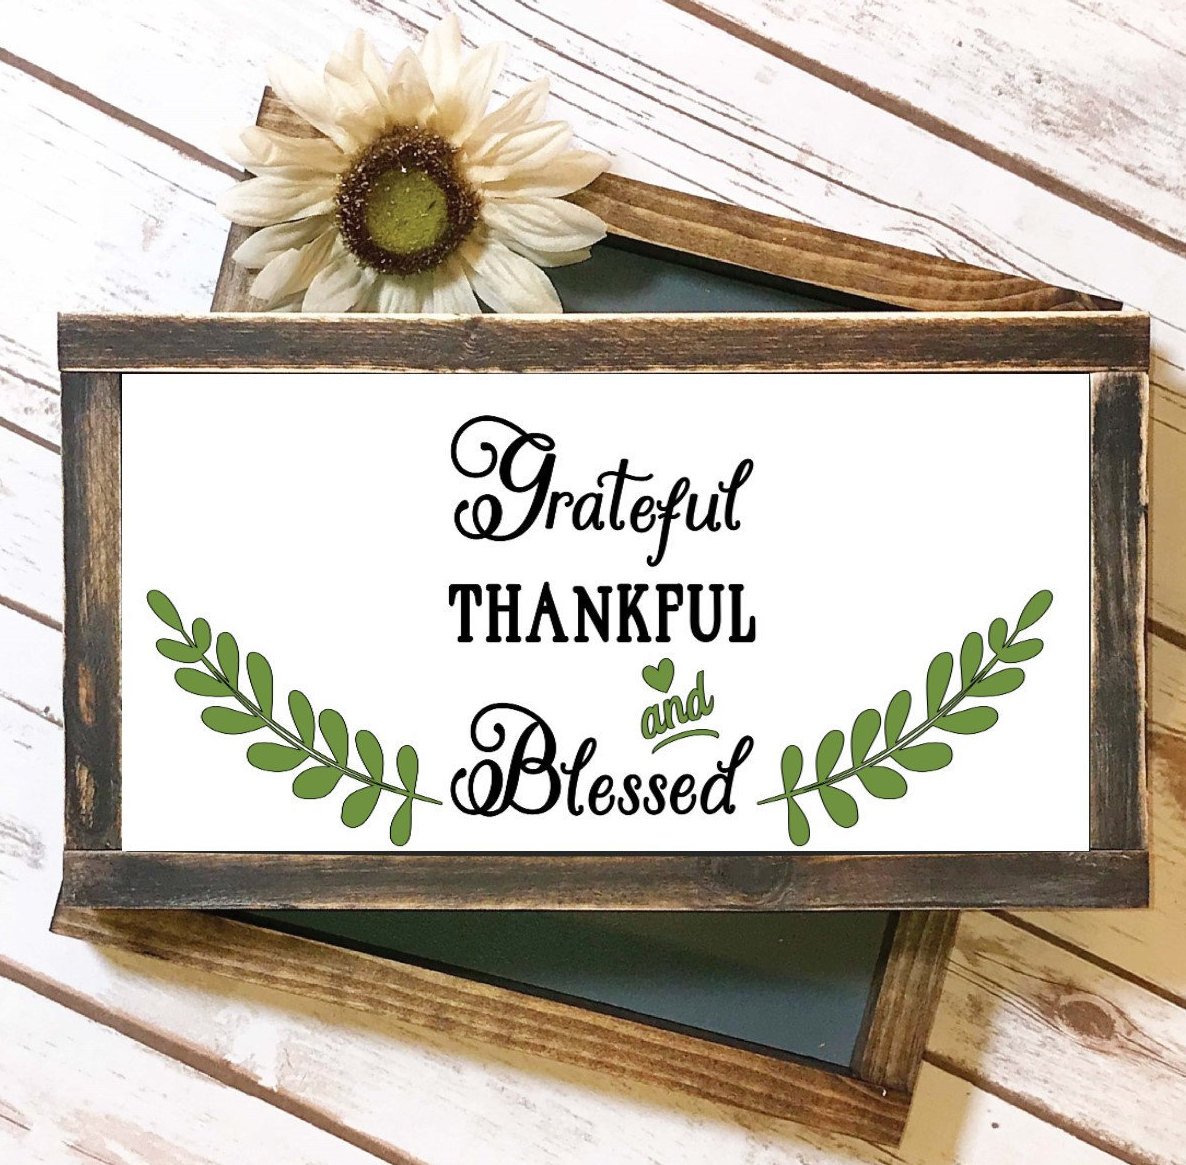 Grateful, Thankful & Blessed sign, It's simple n' cute...Great for any home! etsy.me/2MGmMgX #housewares #homedecor #entryway #farmhousesign, #simplyshabbykouture